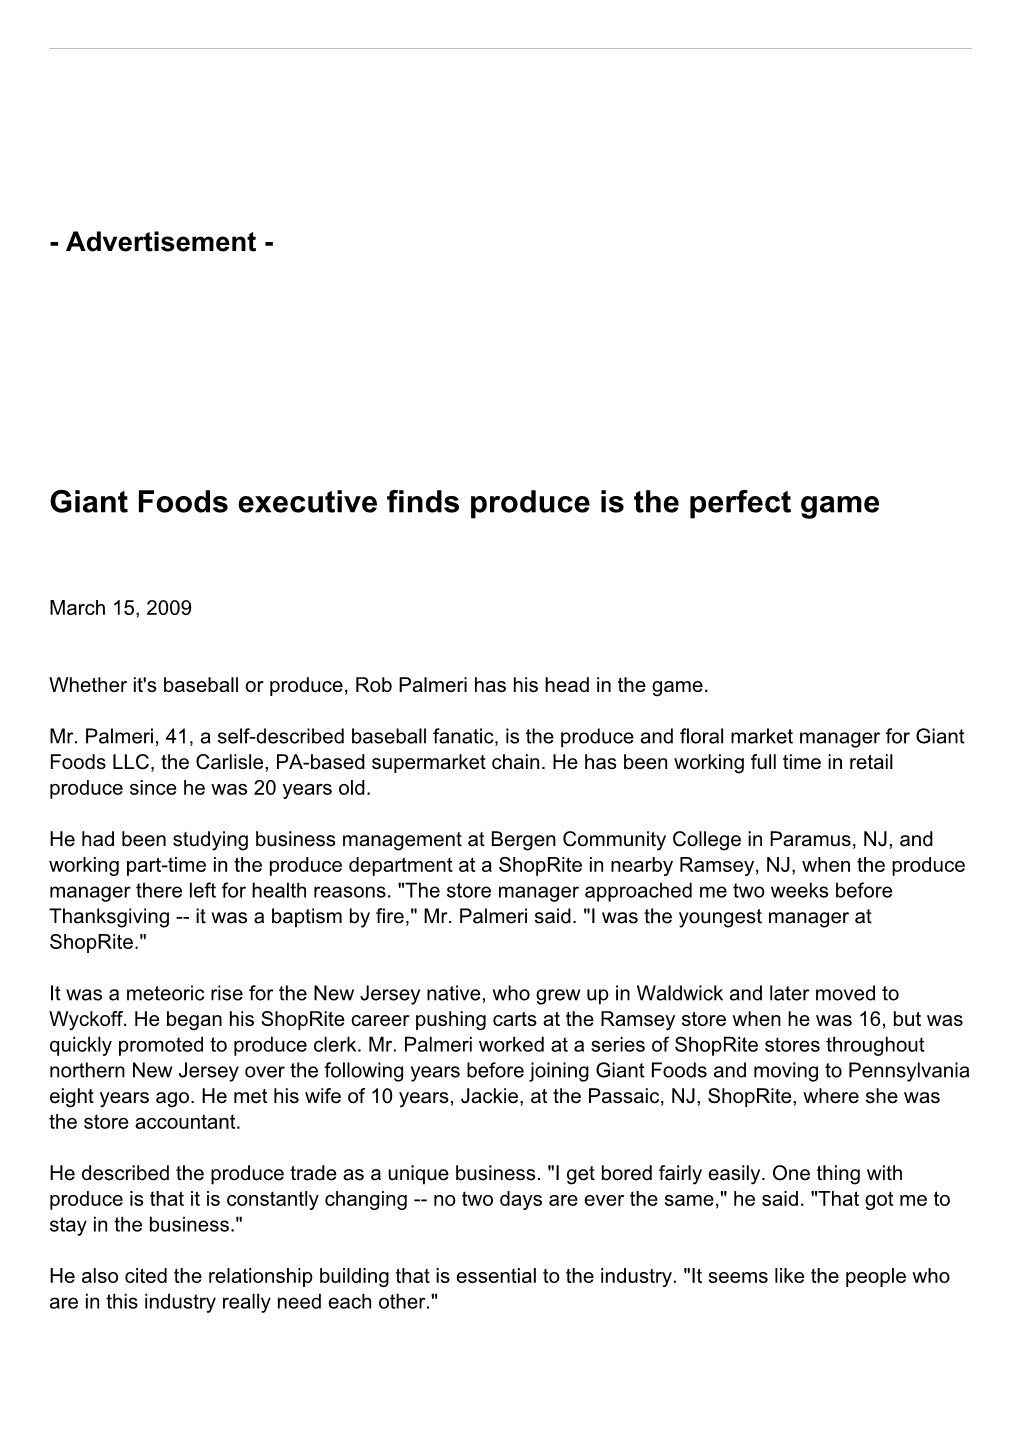 Giant Foods Executive Finds Produce Is the Perfect Game